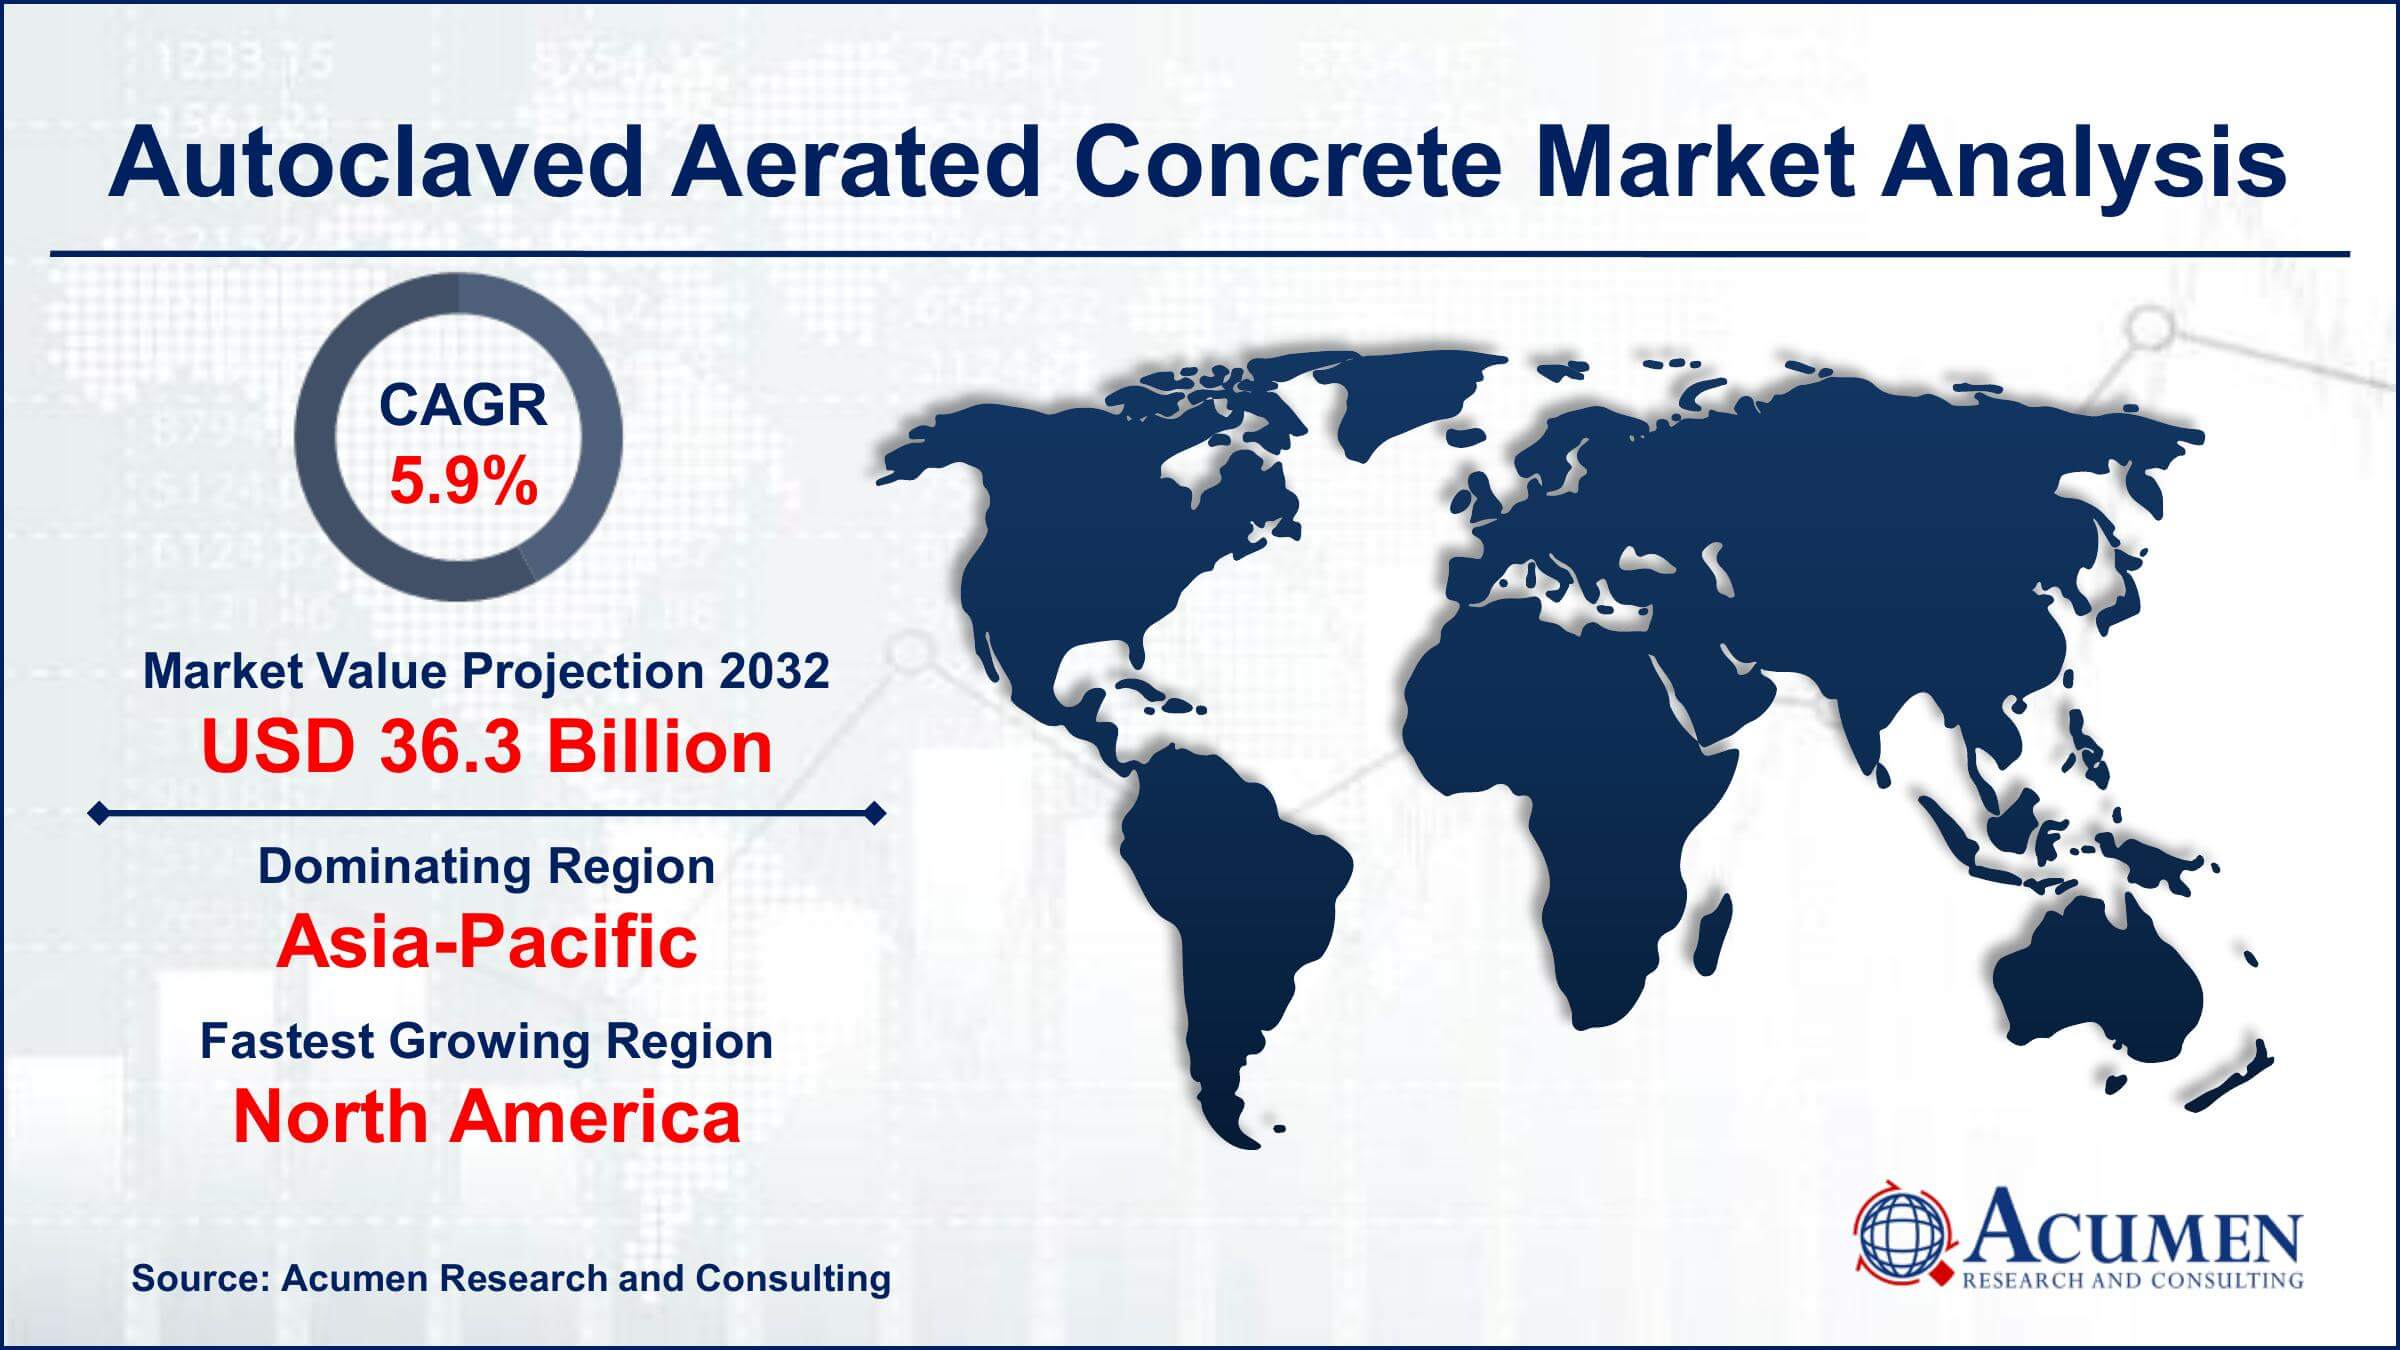 Global Autoclaved Aerated Concrete Market Trends